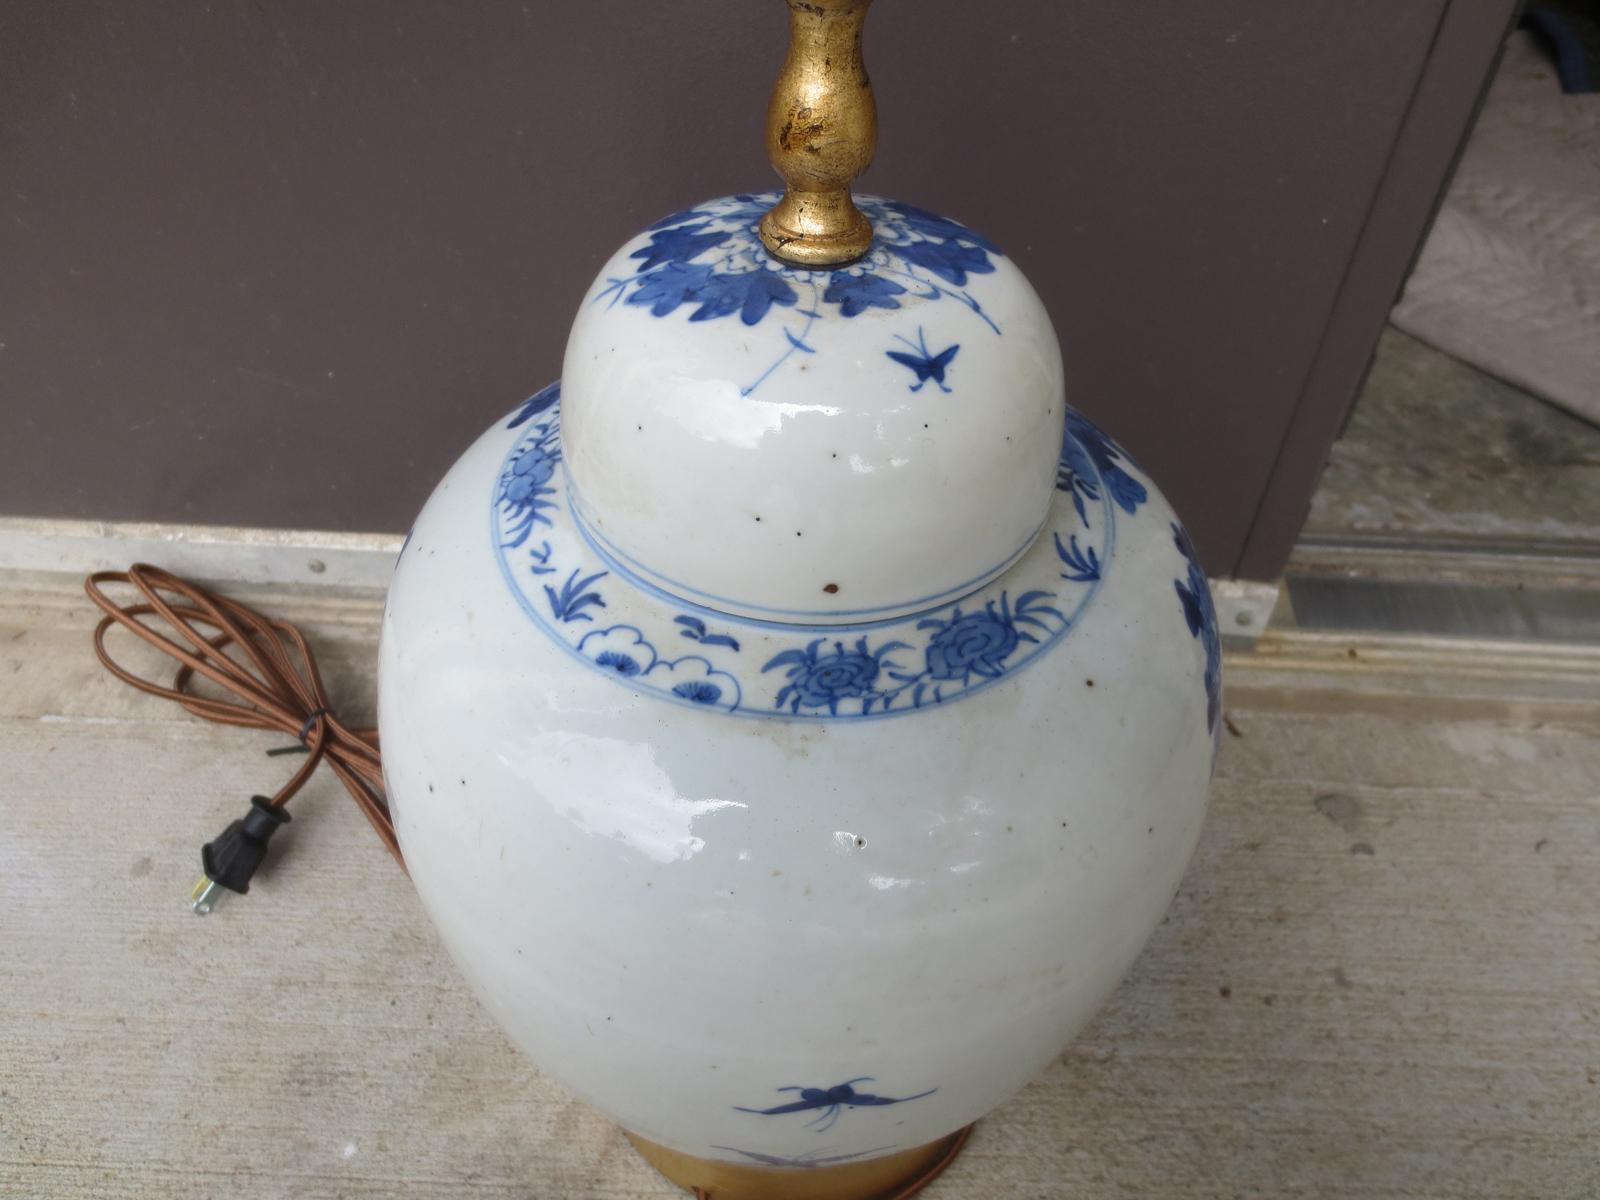 19th-20th century Chinese blue and white porcelain jar on custom giltwood base
New wiring.